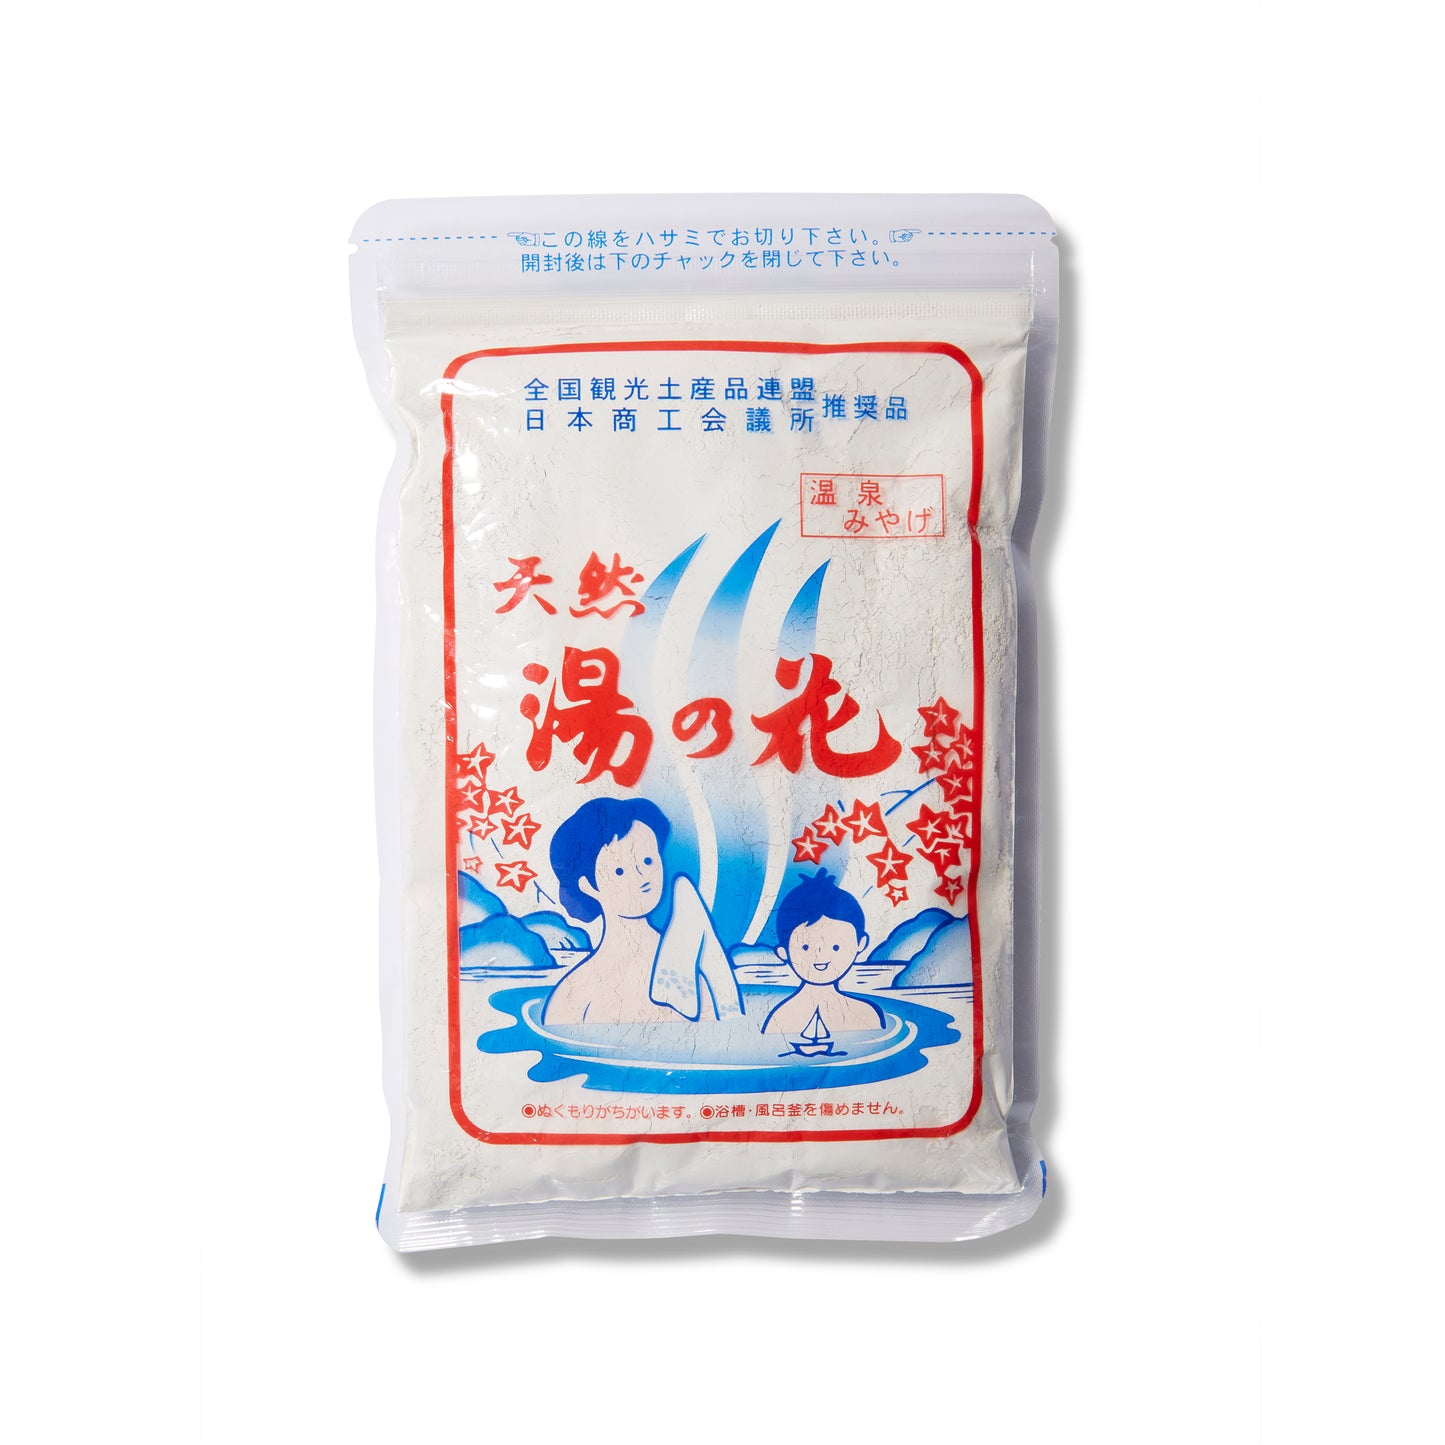 The Yunohana Onsen Powder has an illustration of a family in a natural hot spring with Japanese writing on it. 